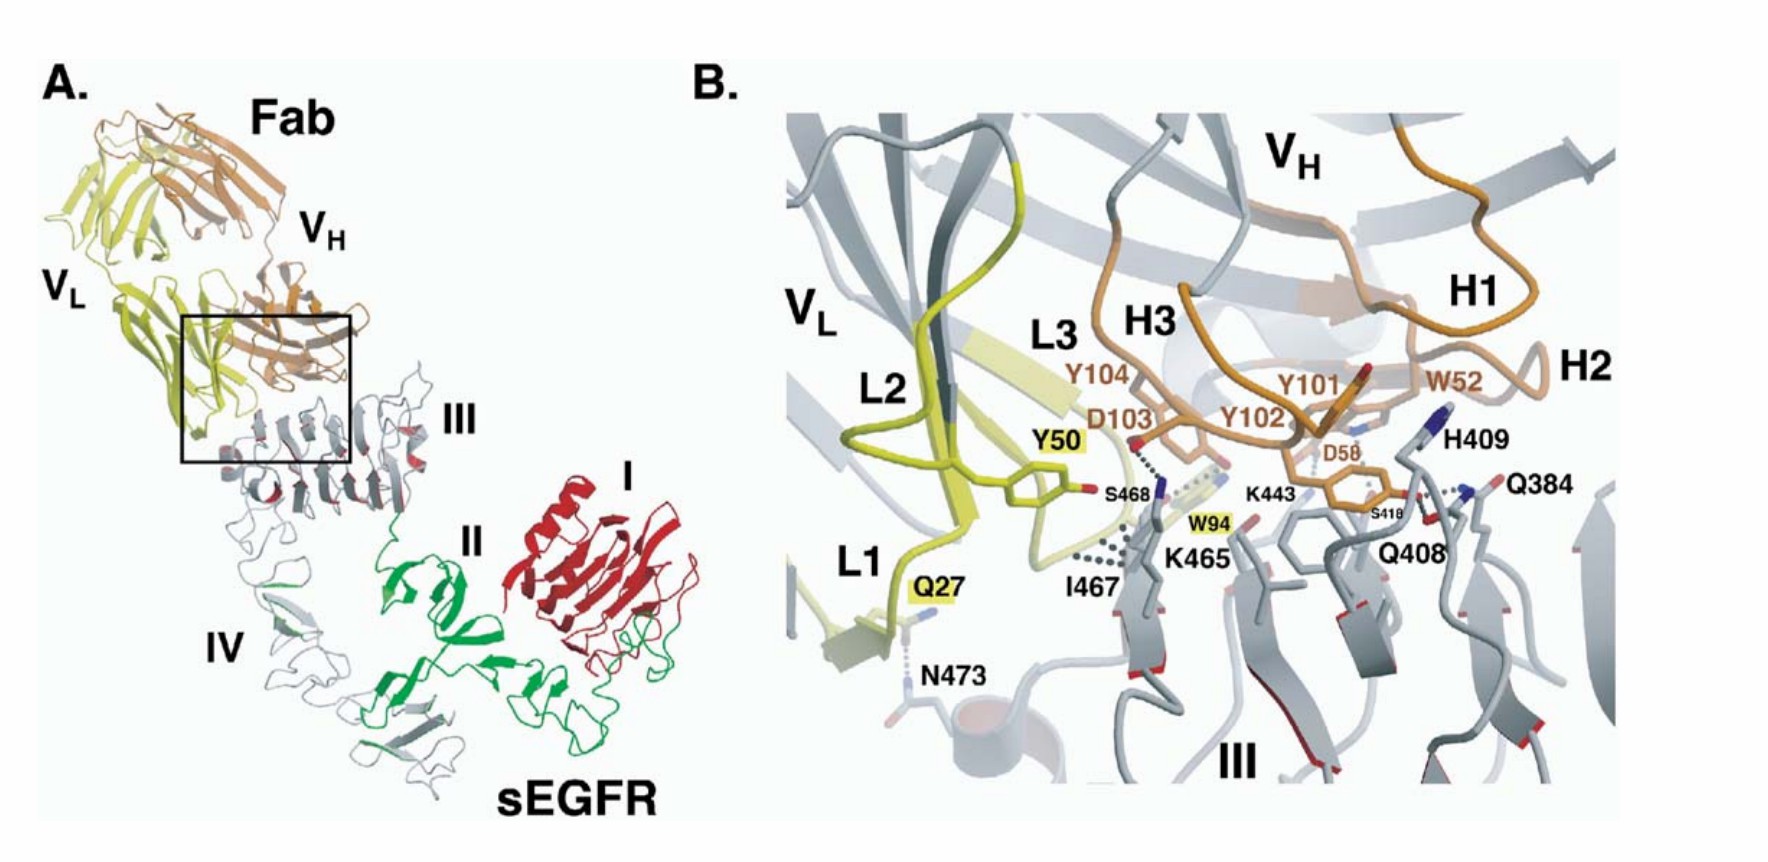 X-ray crystal structure of the Cetuximab binding domain on soluble EGFR. (Li, et al., 2005)